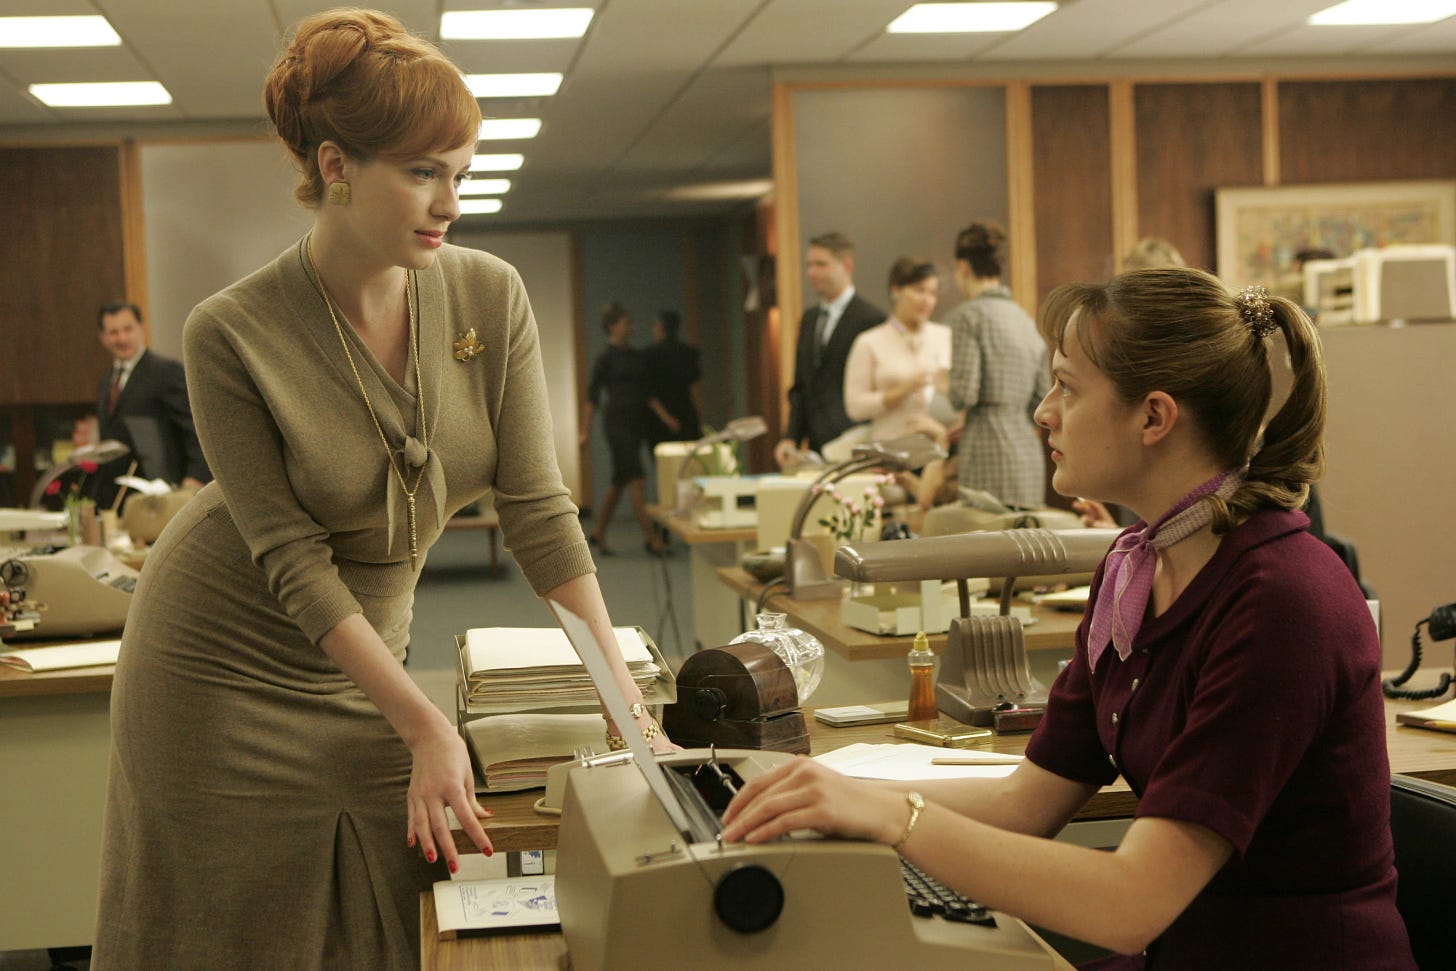 A white 30-something woman in a grey dress hovers over the desk of a 20-something woman in a purple dress, who looks up from her typewriter. They're in a 1960s office.